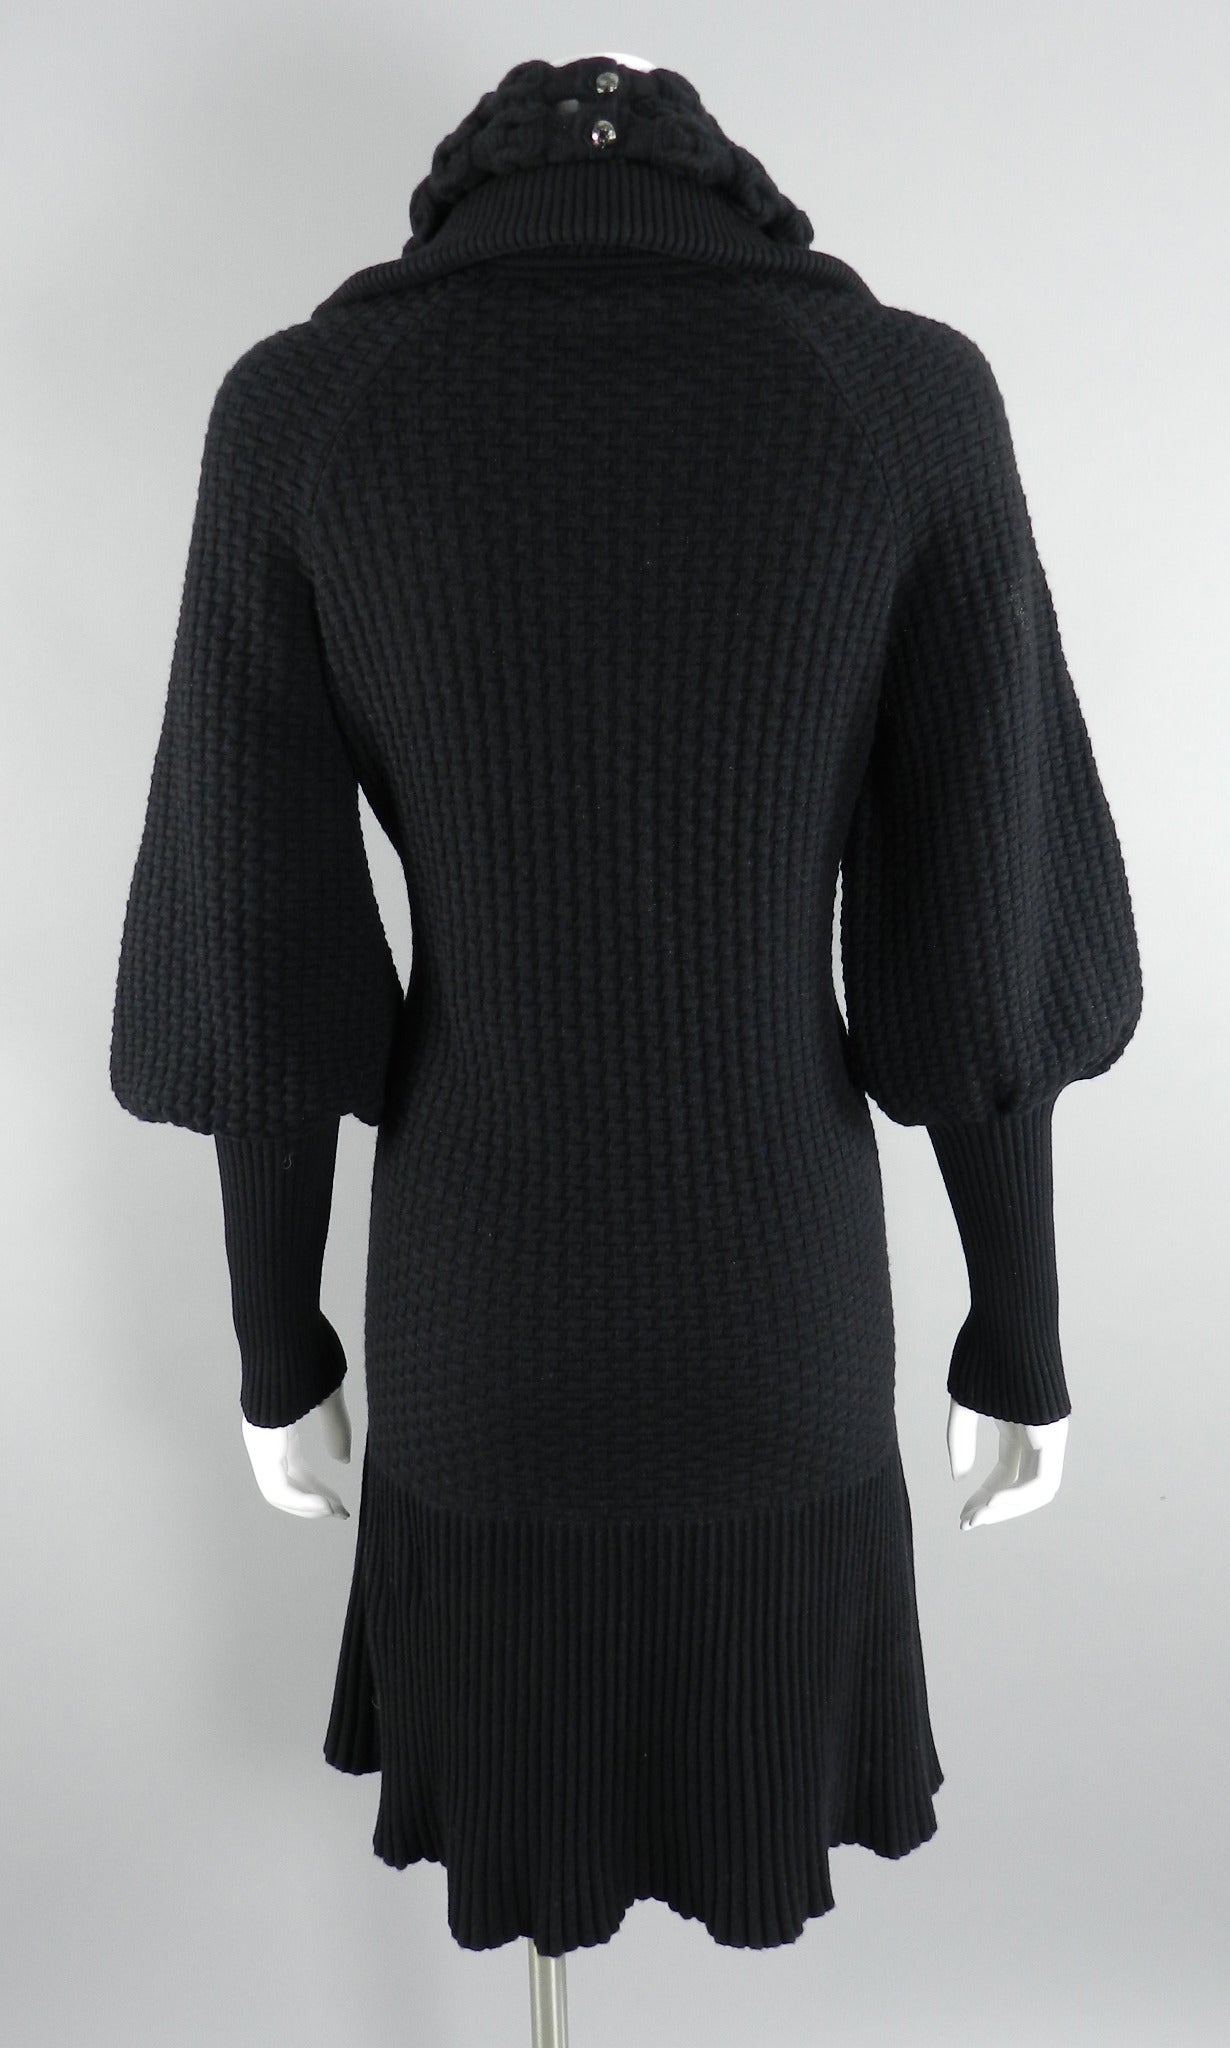 Chanel 13A Runway Black Knit Sweater Dress with Necklace 1